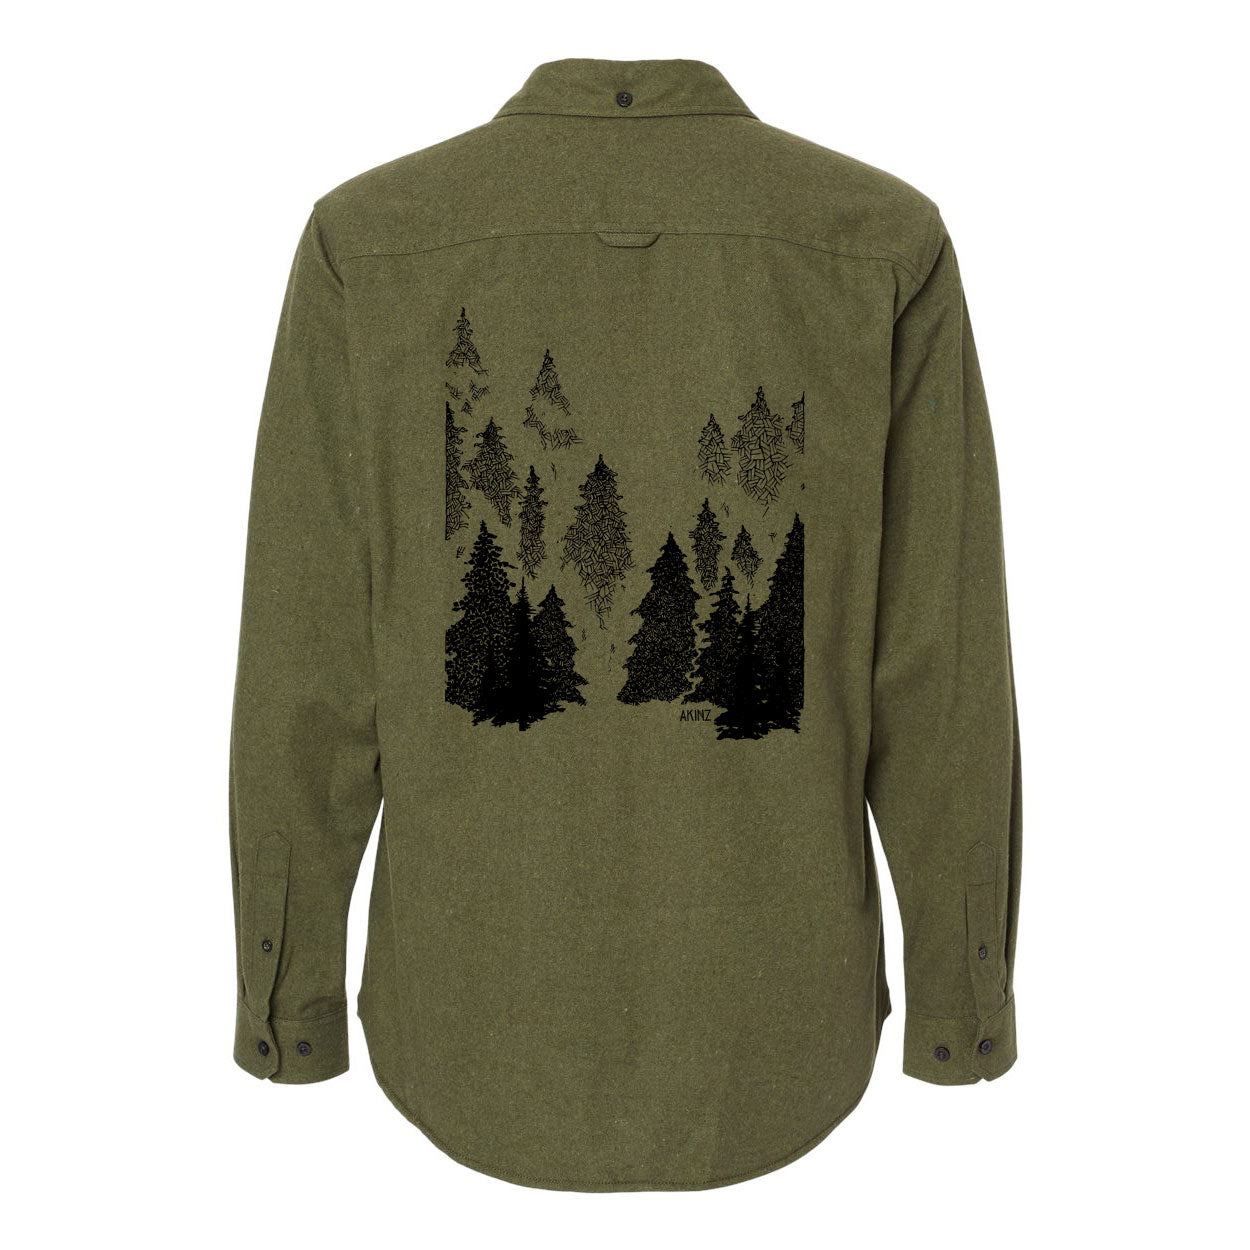 into-the-evergreen-flannel---back-military-green.jpg